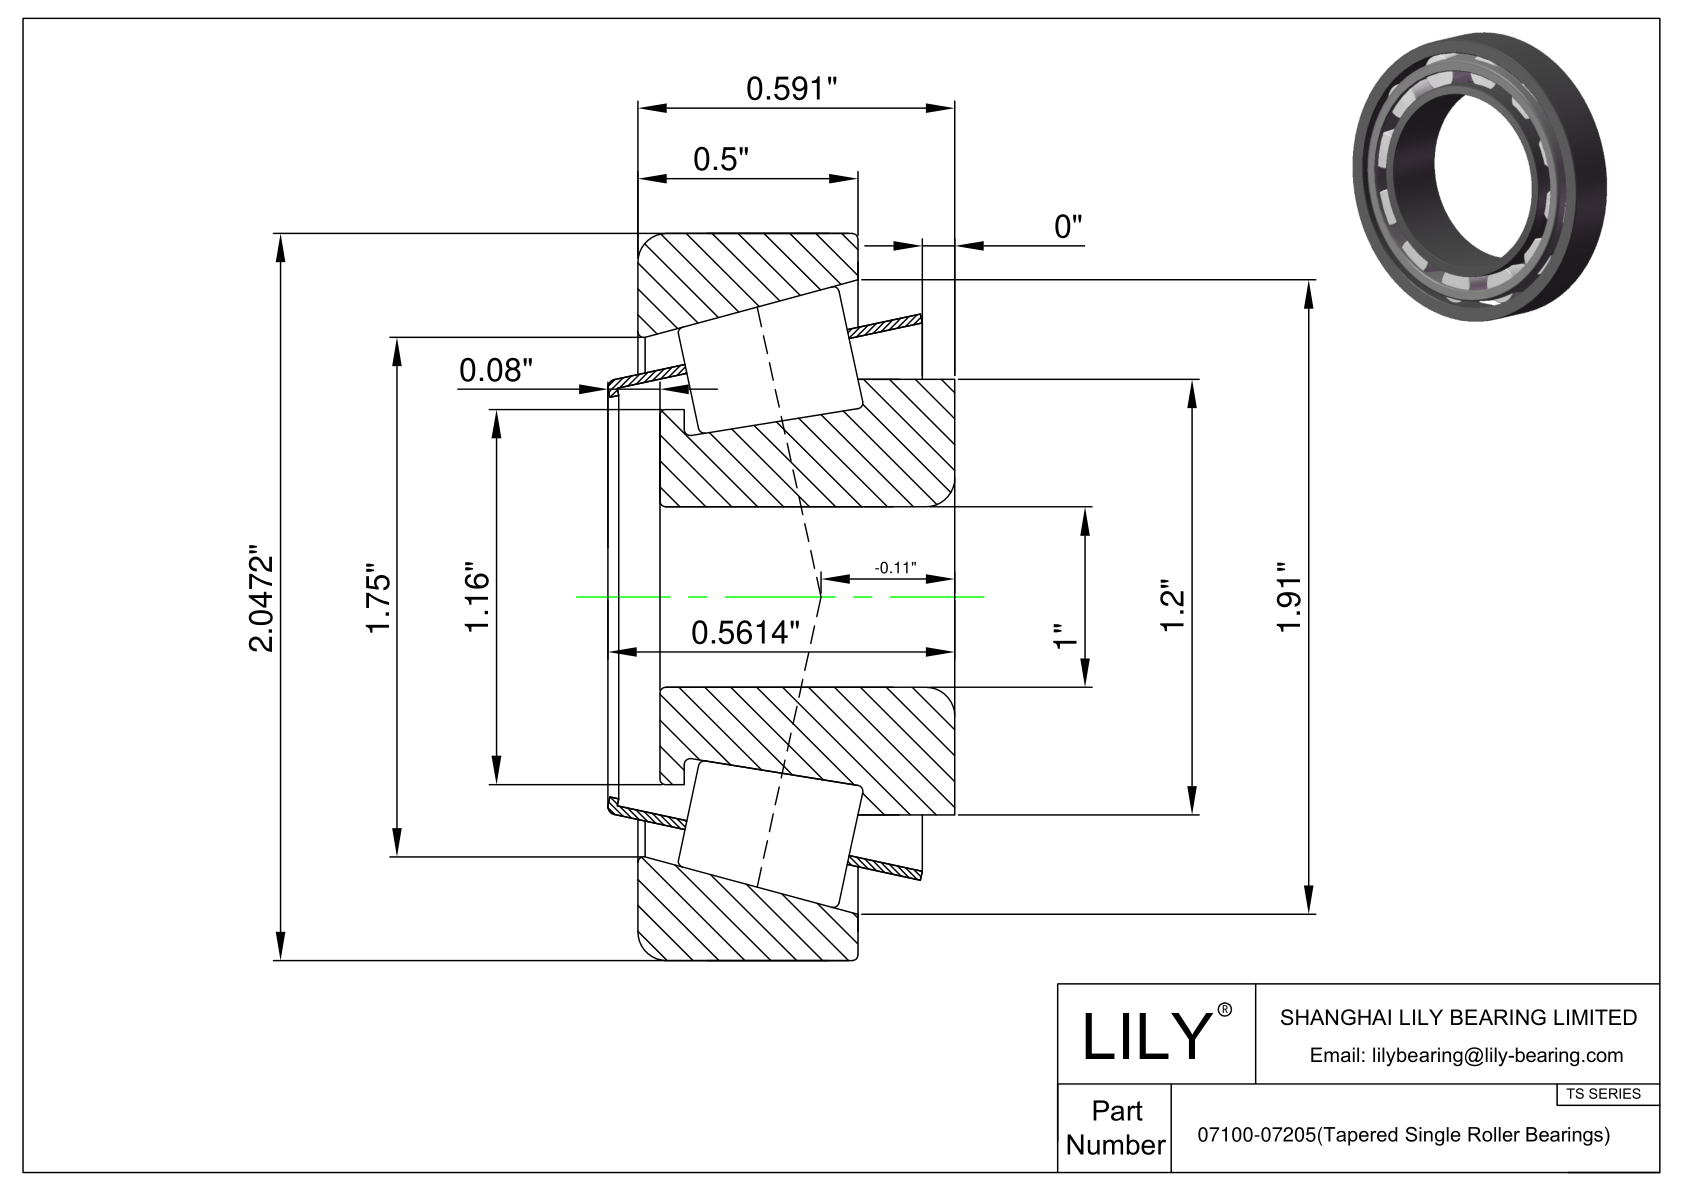 07100-07205 TS (Tapered Single Roller Bearings) (Imperial) cad drawing